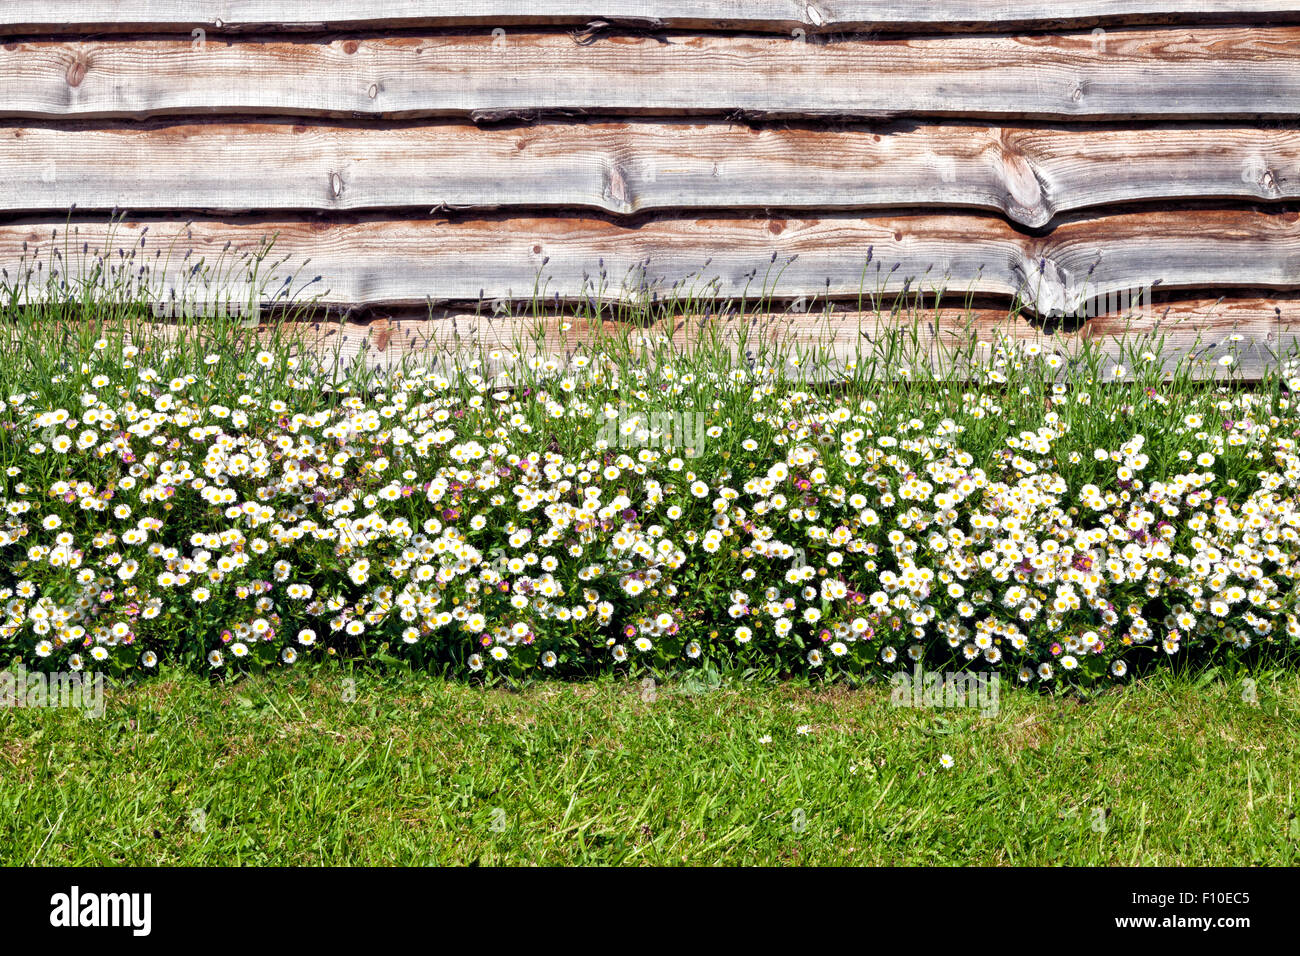 Small white wild flowers, purple lavender on a brown wood wall, with grass in the foreground, in a summer garden Stock Photo